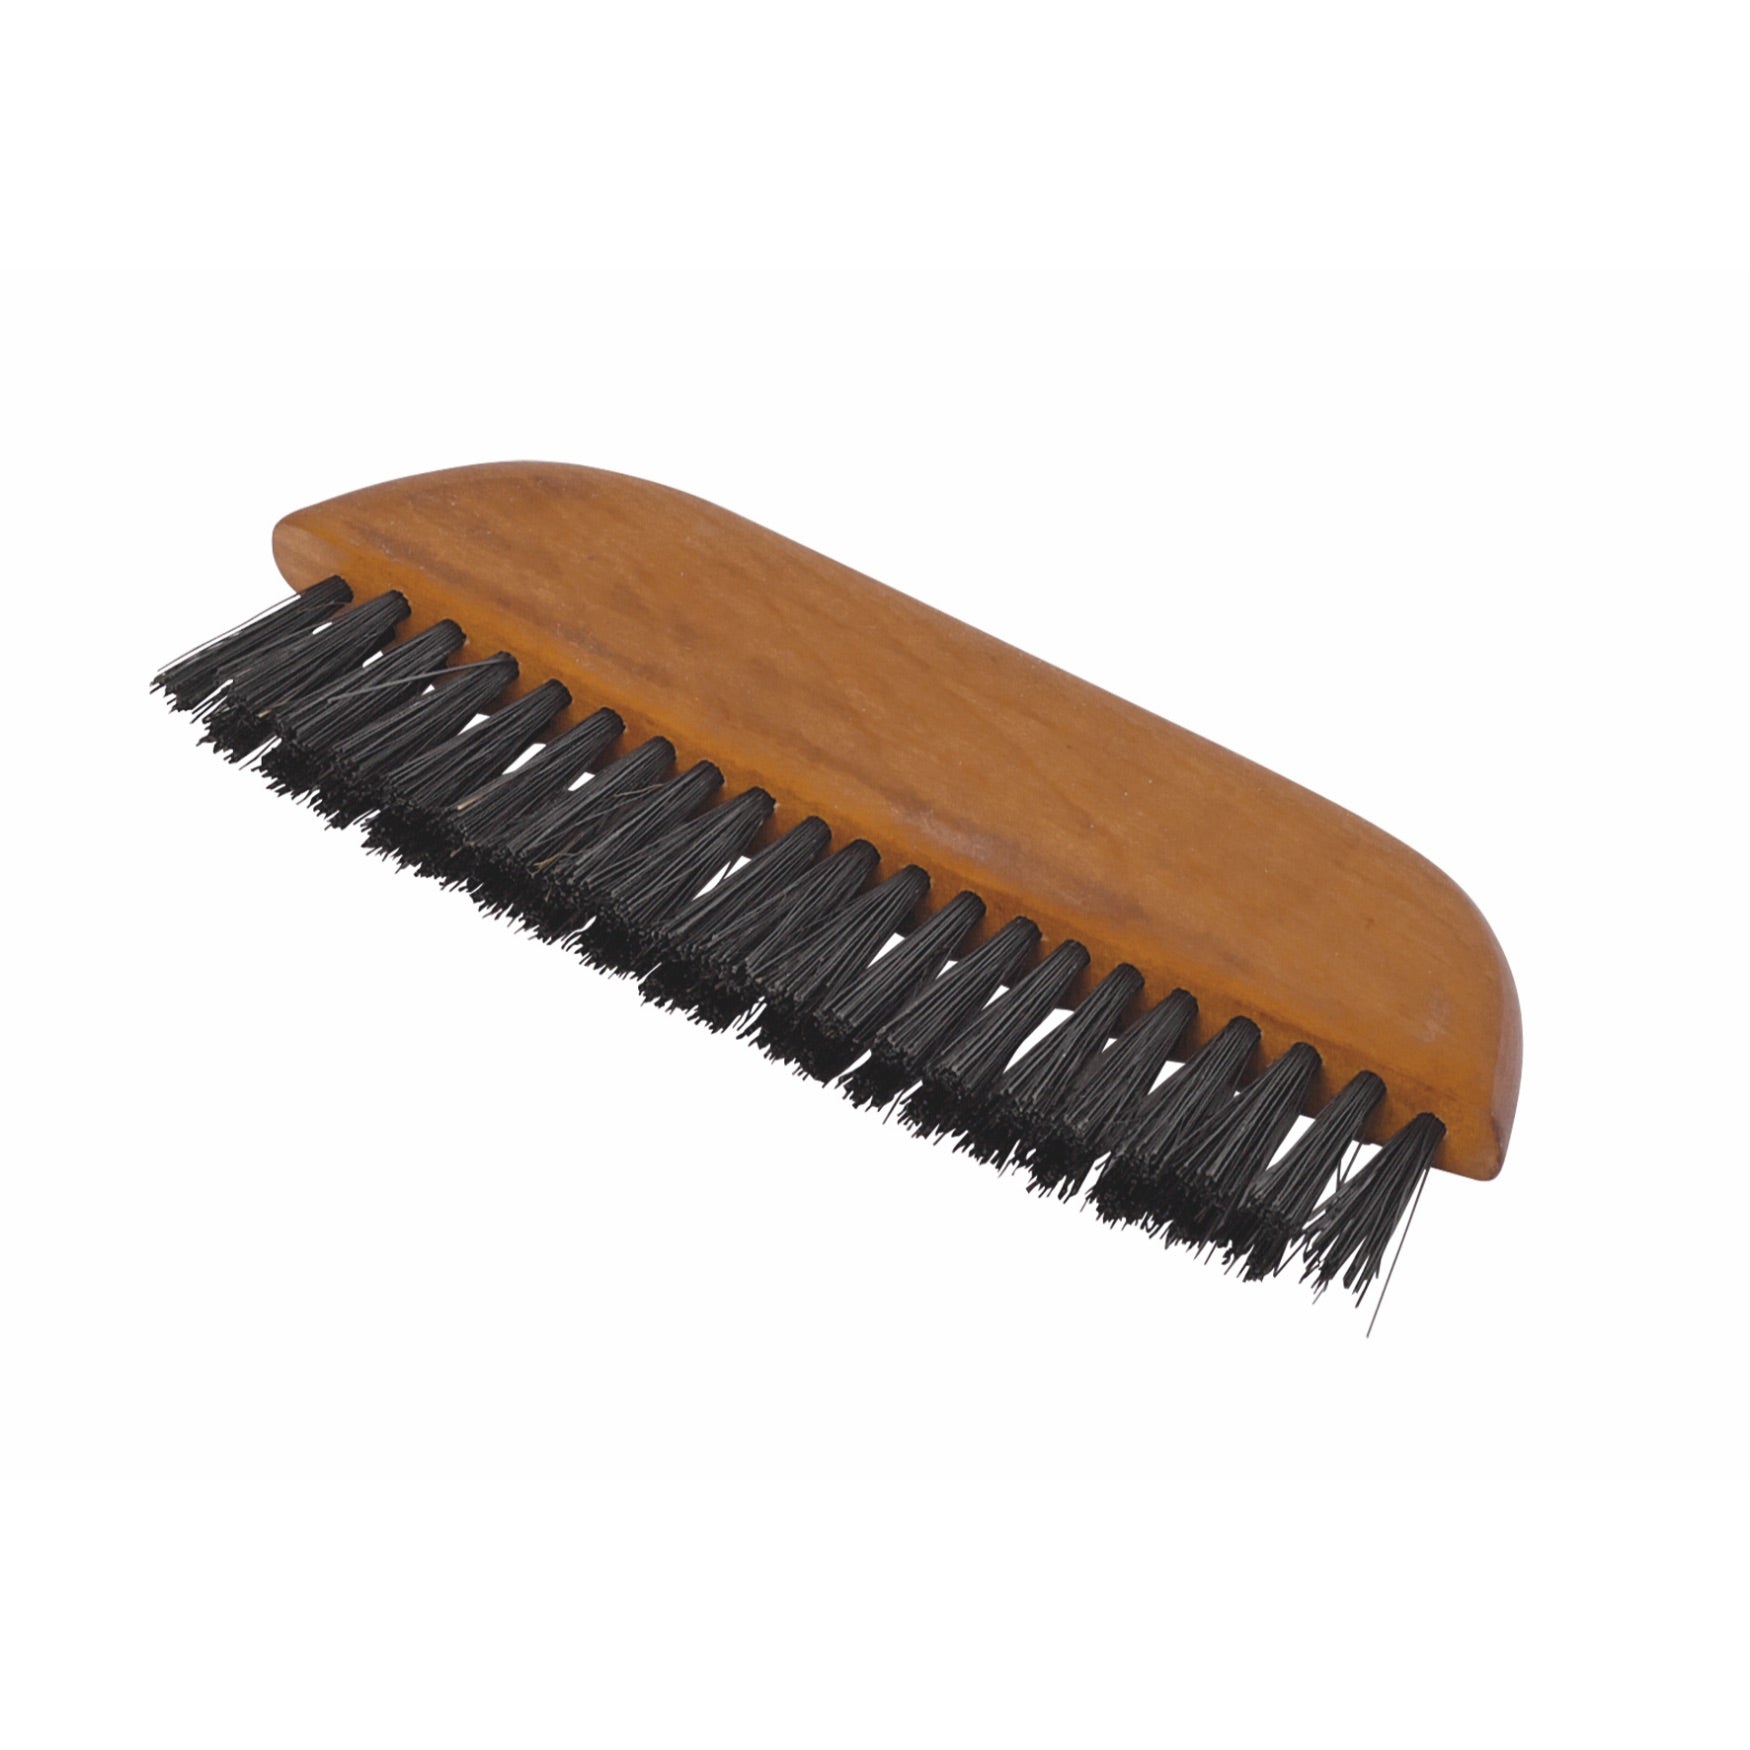 Clothes Brushes – The Oxford Brush Company